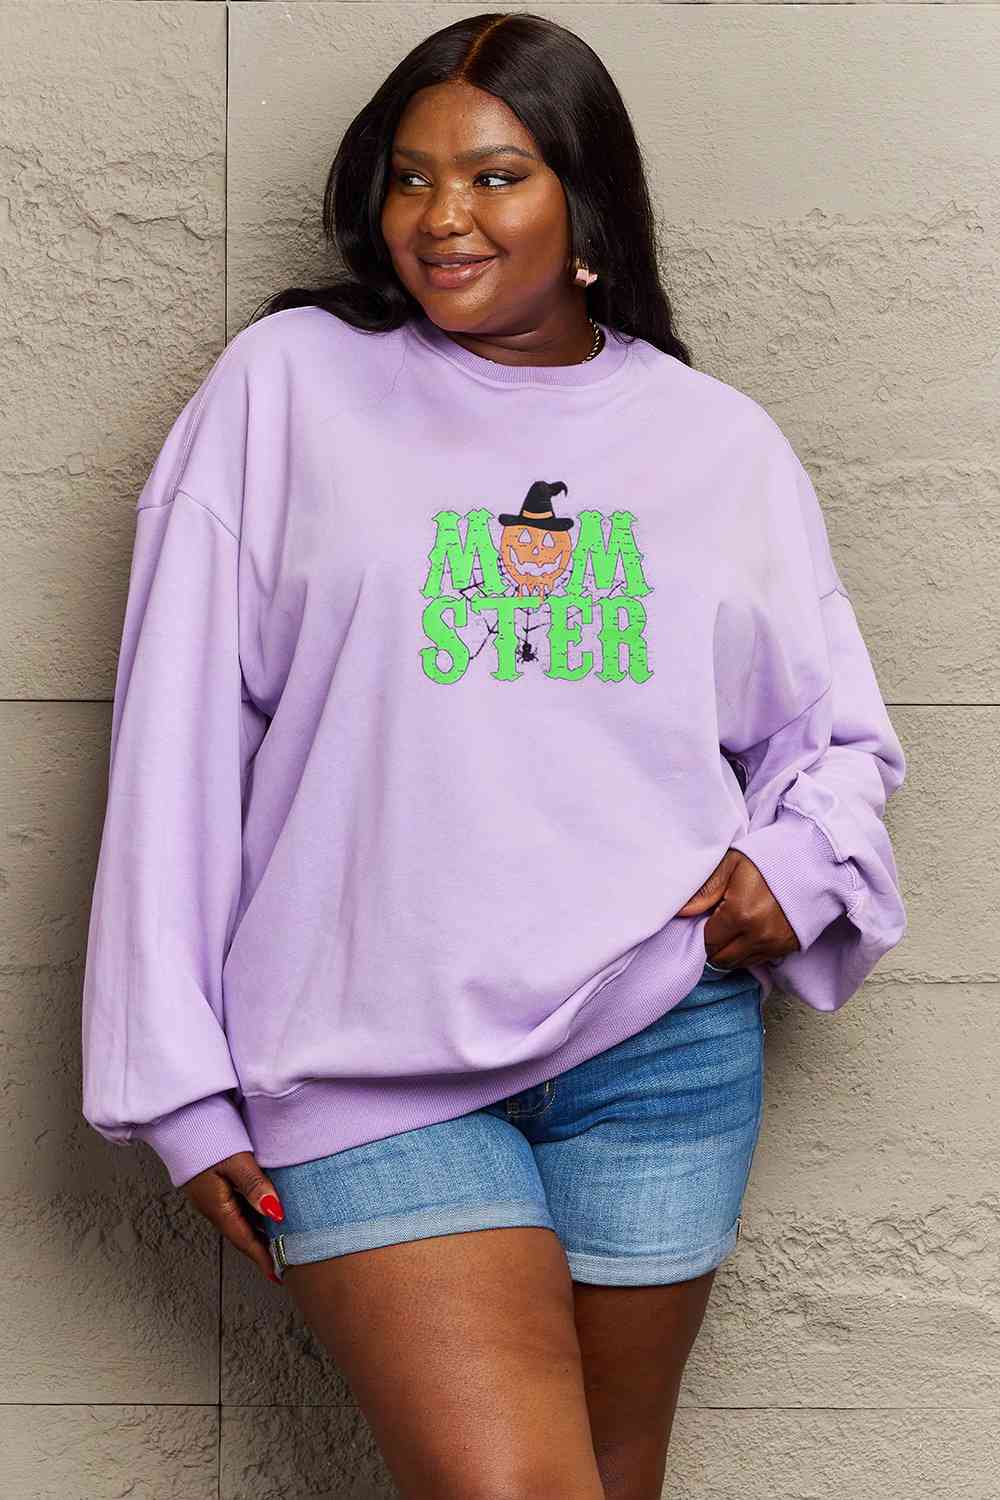 Simply Love Full Size Drop Shoulder Graphic Sweatshirt - Guy Christopher